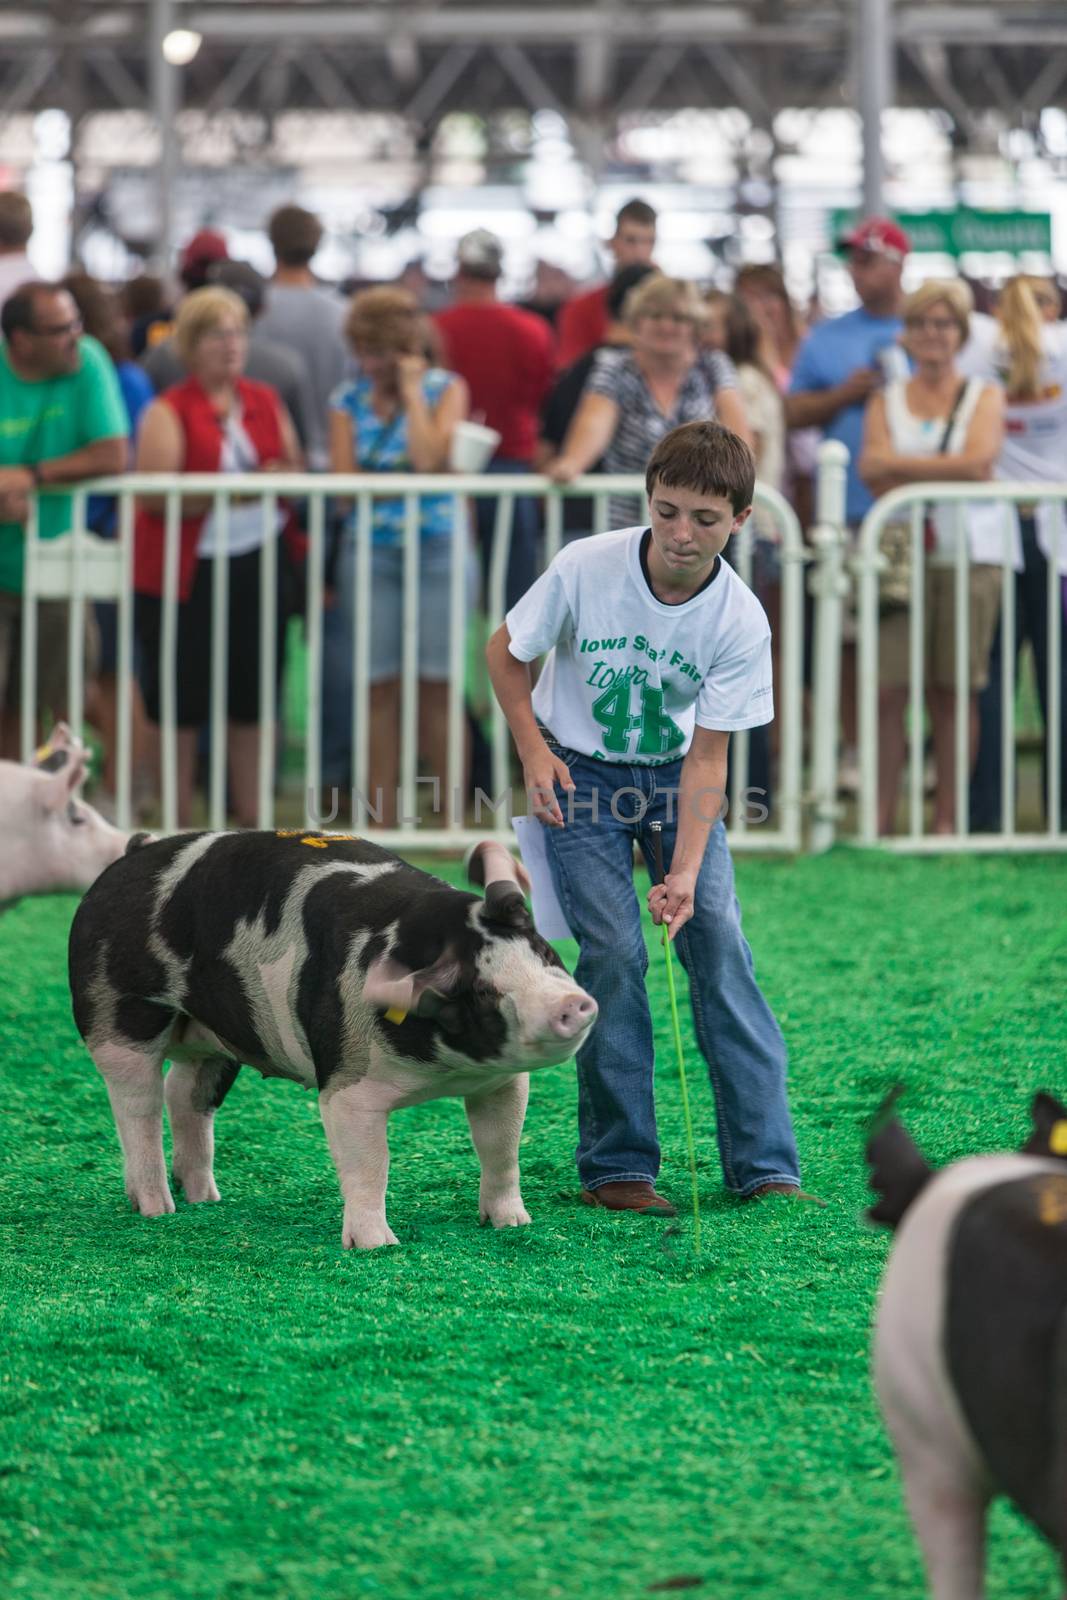 DES MOINES, IA /USA - AUGUST 10: Unidentified teen exercising and showing swine at Iowa State Fair on August 10, 2014 in Des Moines, Iowa, USA.